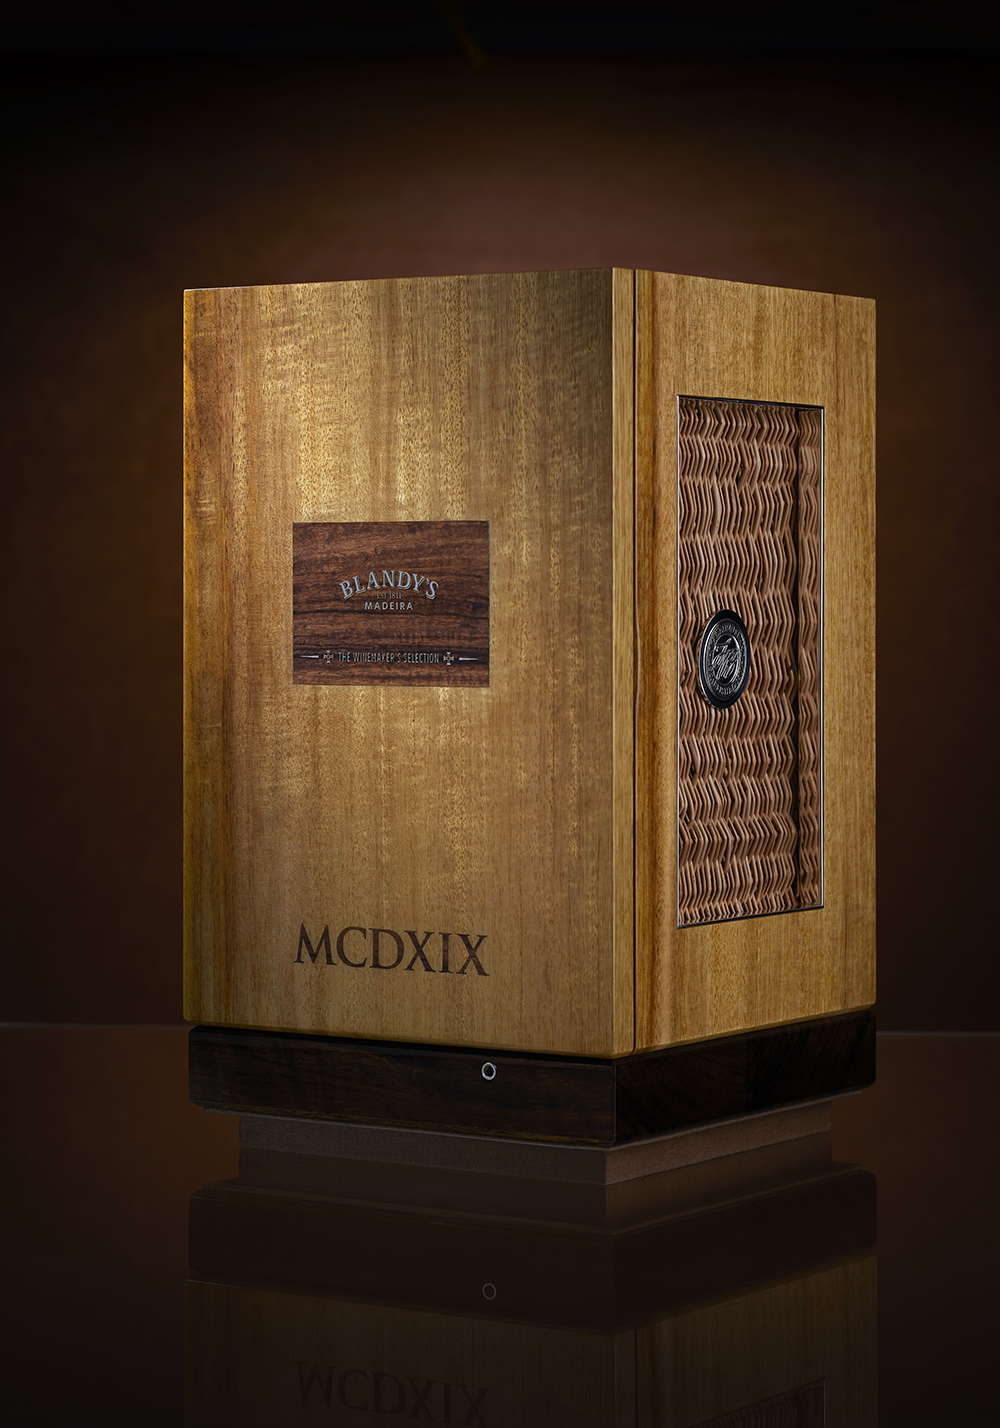 MUSE Design Winners - Blandy's - The Winemaker's Selection